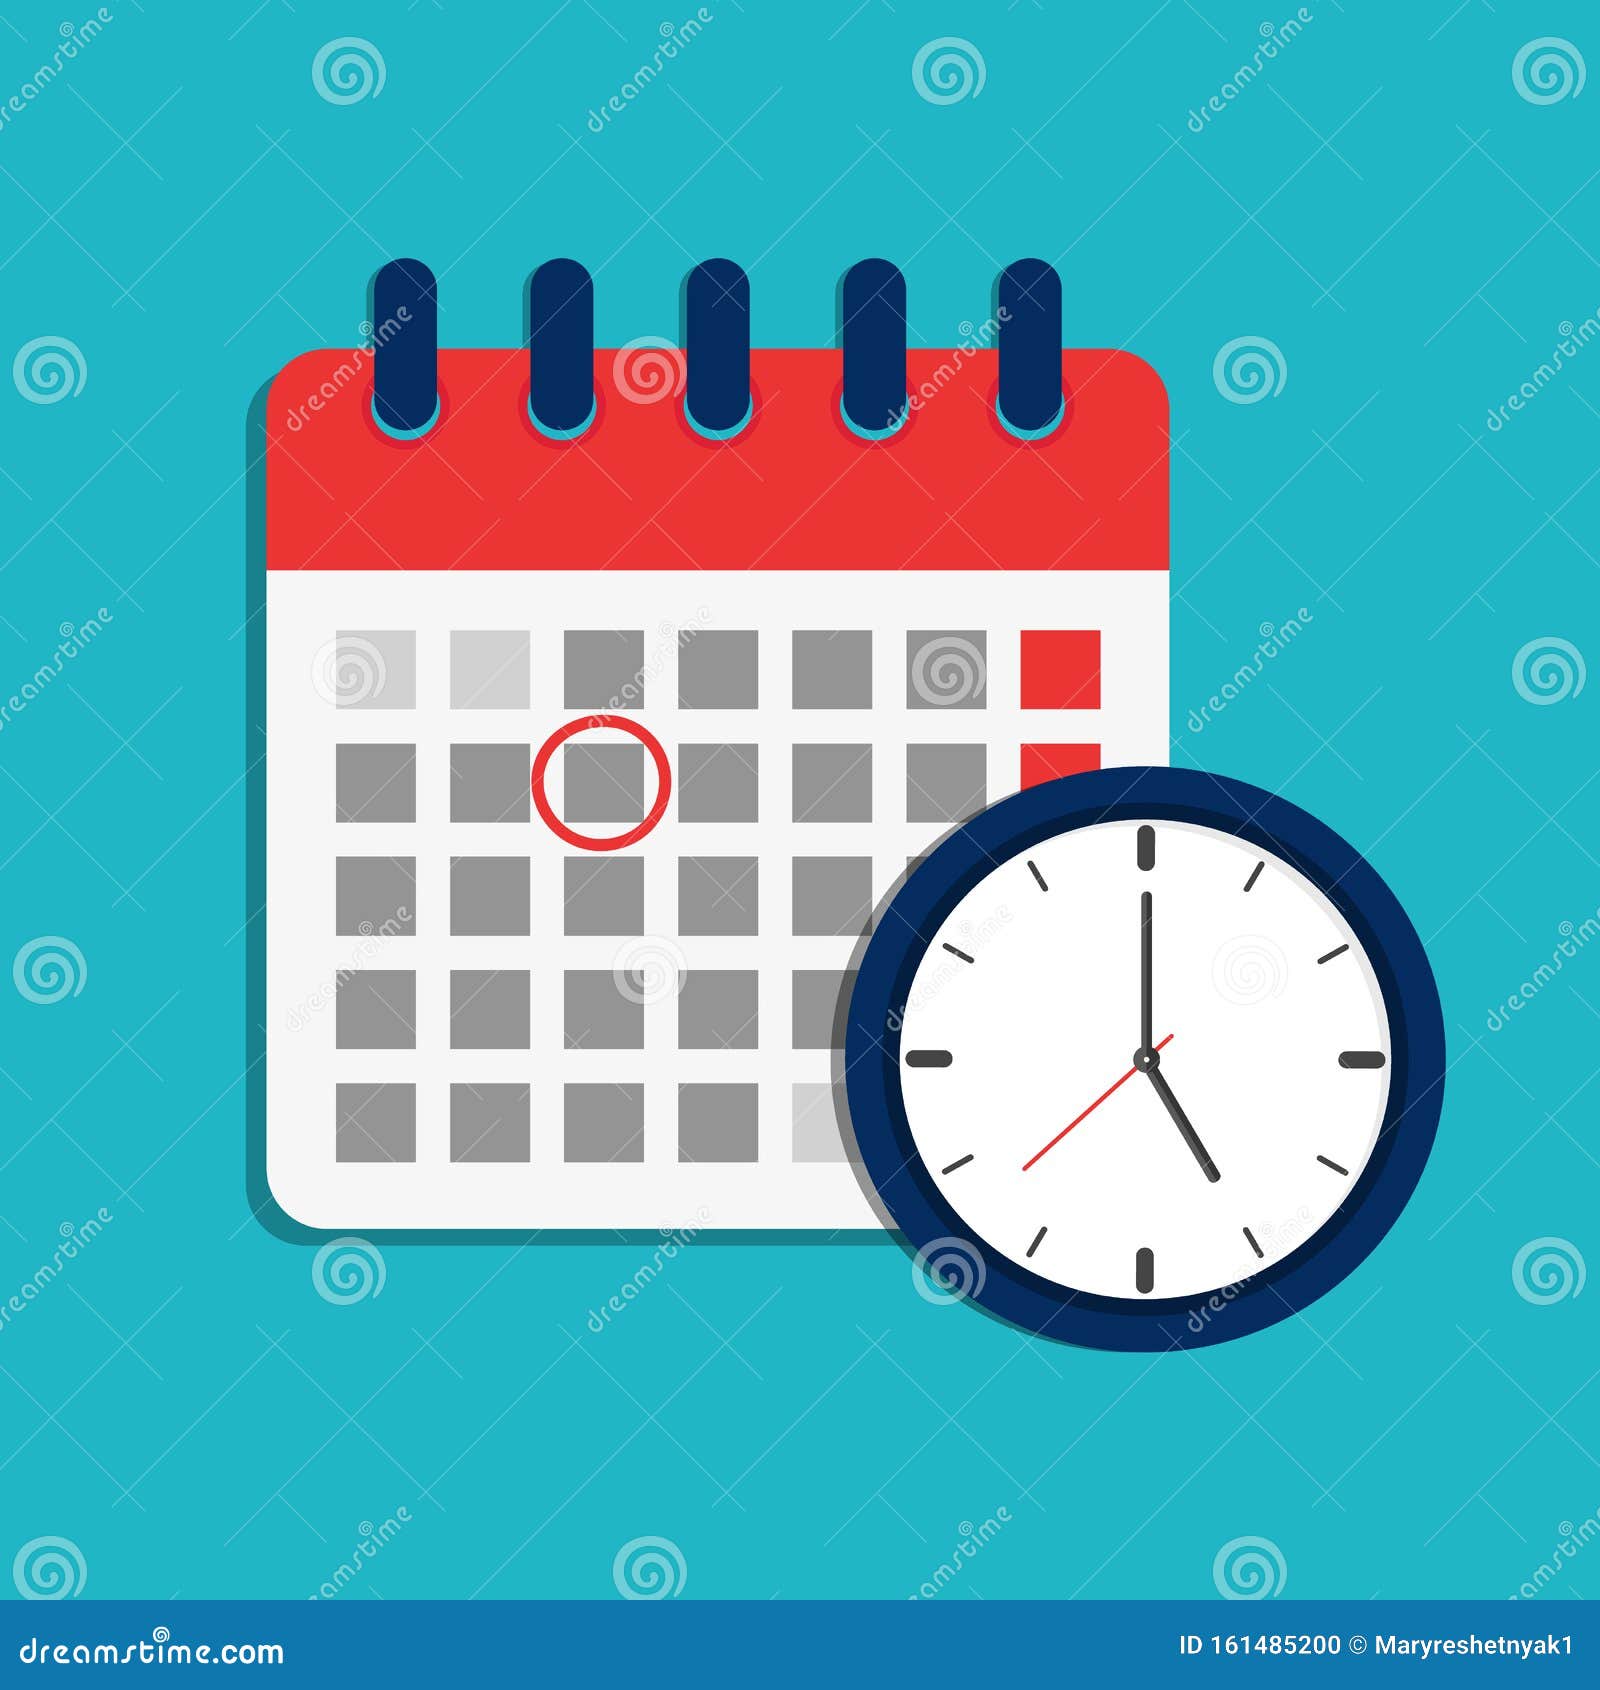 calendar schedule and clock icon. time appointment, reminder date concept. flat organizer, timesheet, time management with alarm